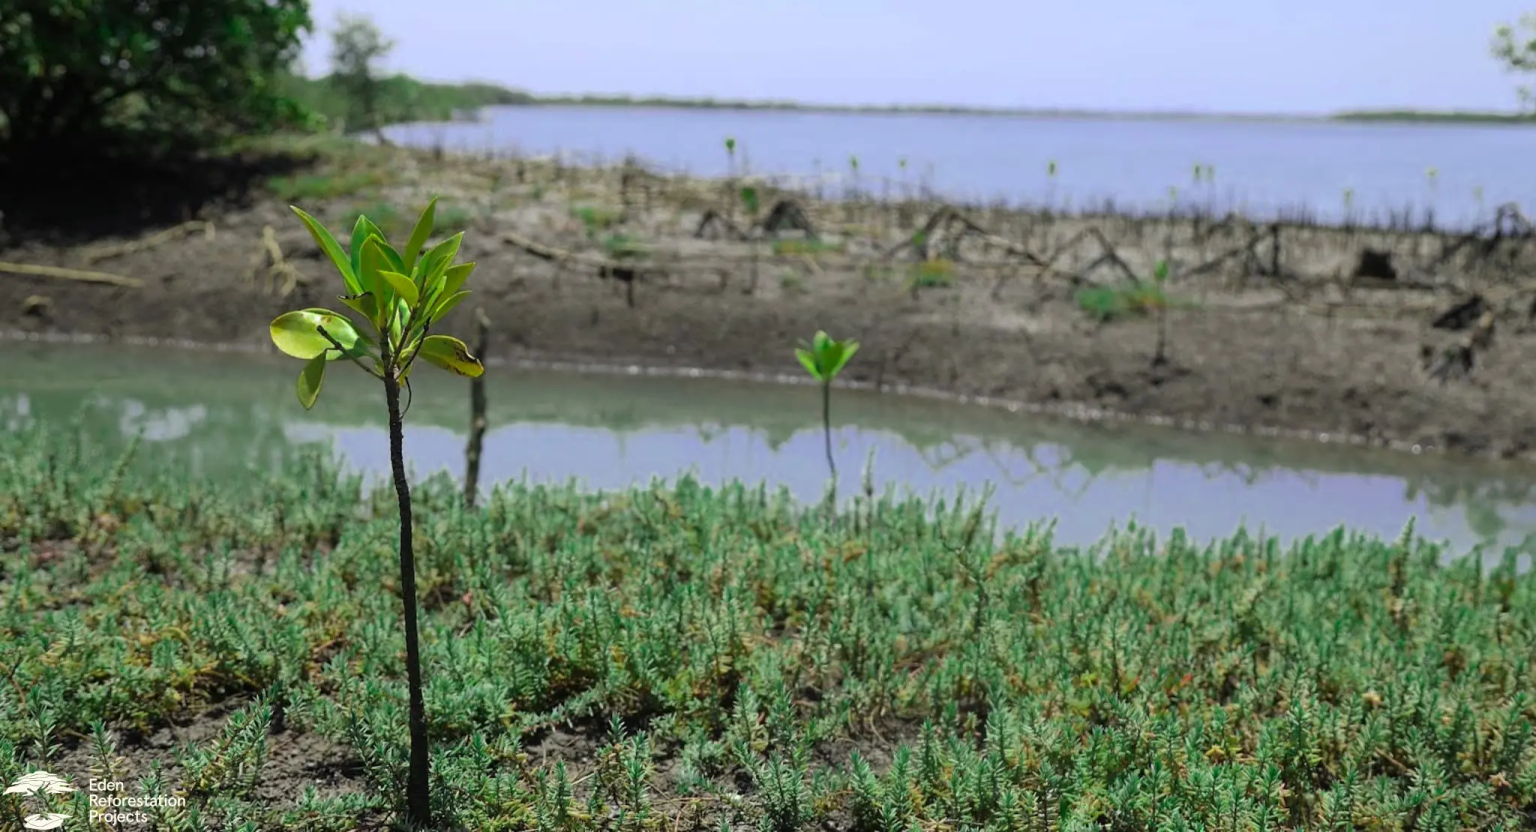 A close up of a planted tree seedling with a lake behind it